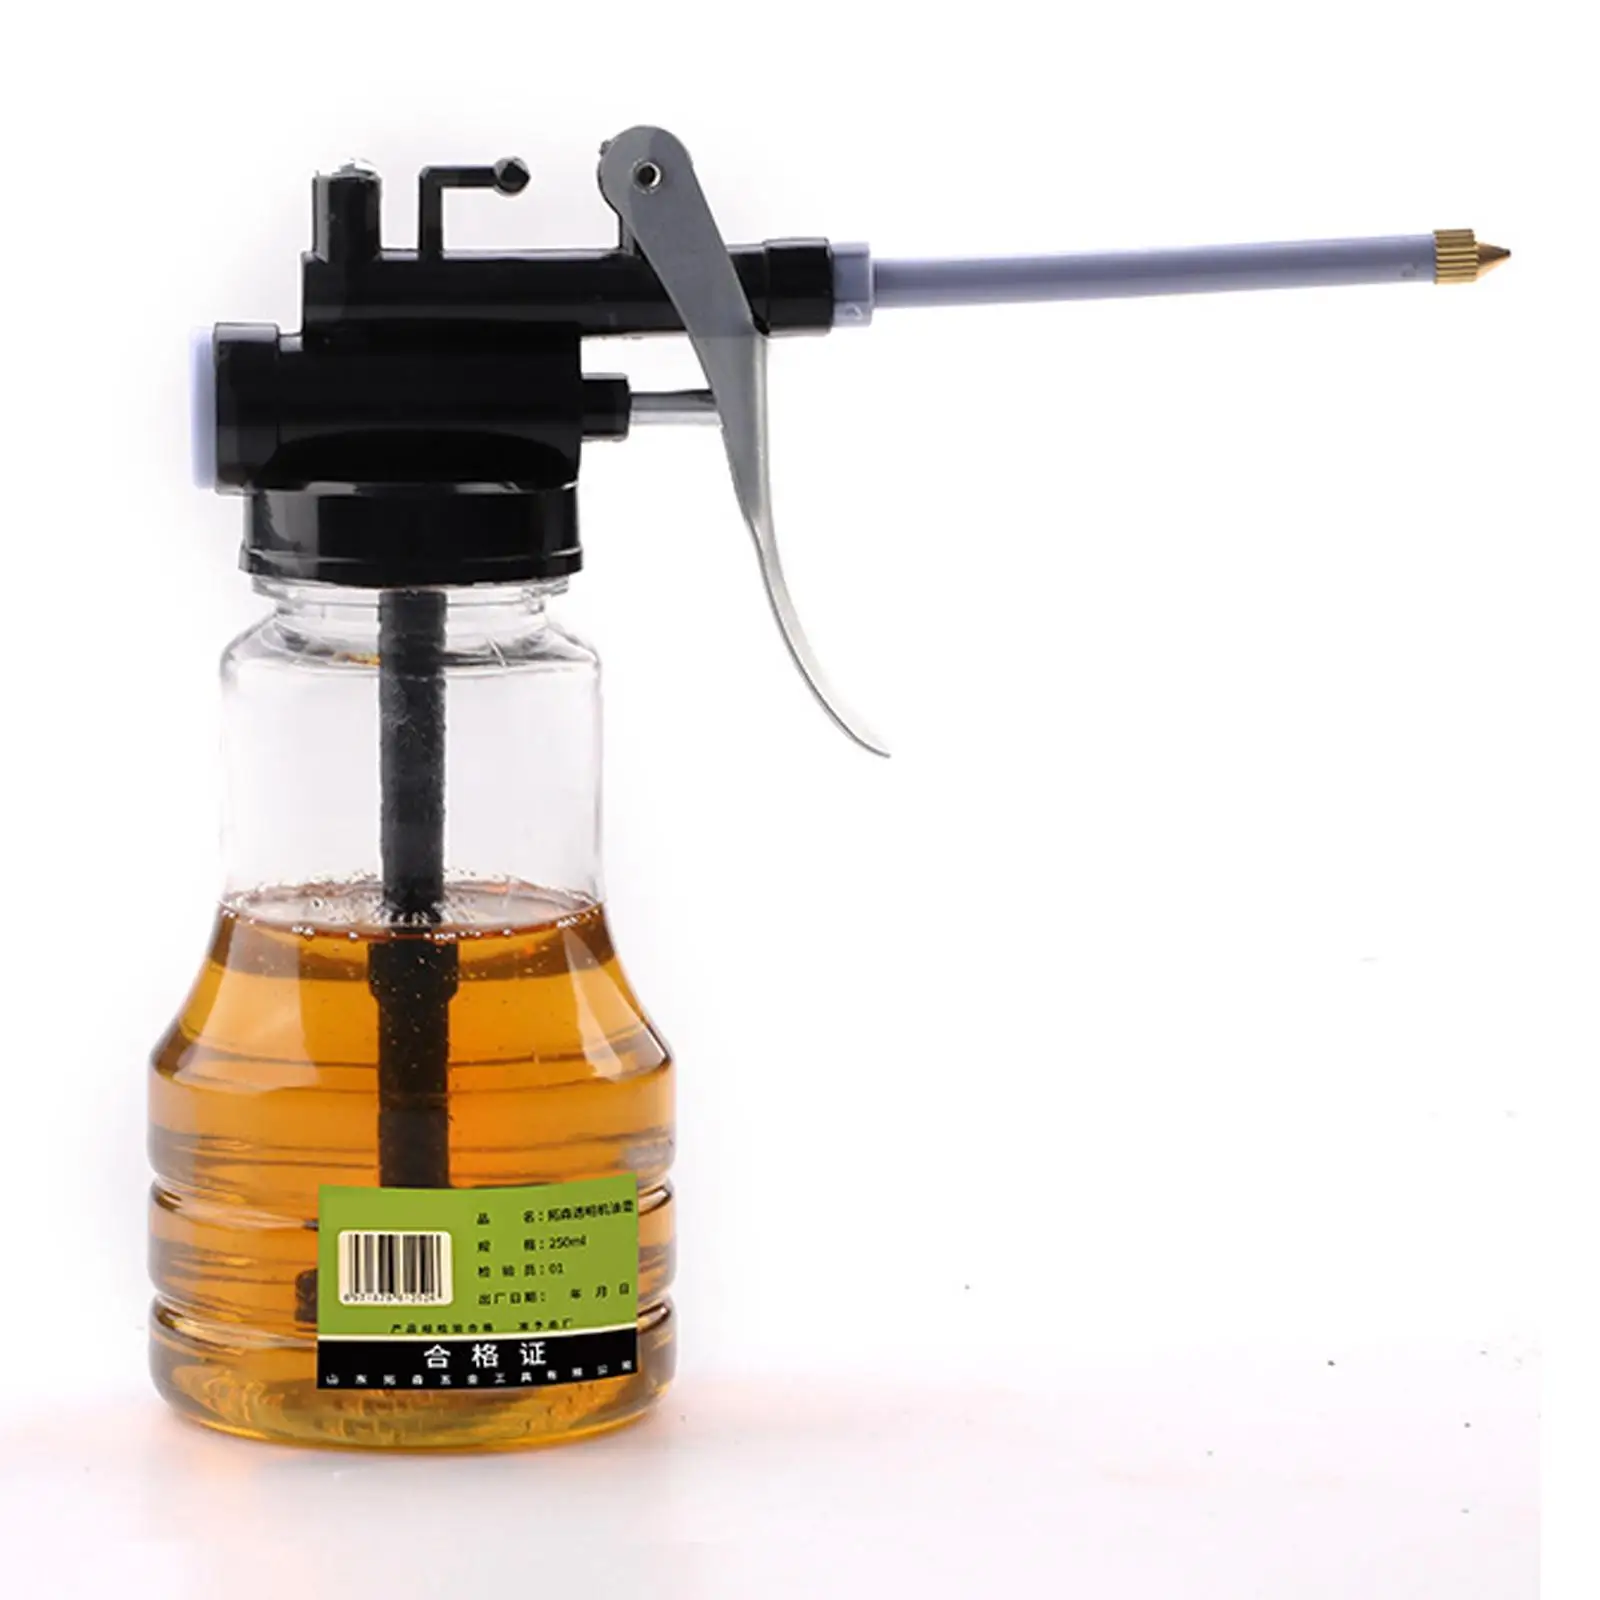 Transparent Lubrication Oil Can, High Pressure Oiler Durable Container Portable Universal Pump Injector Jug for Repair